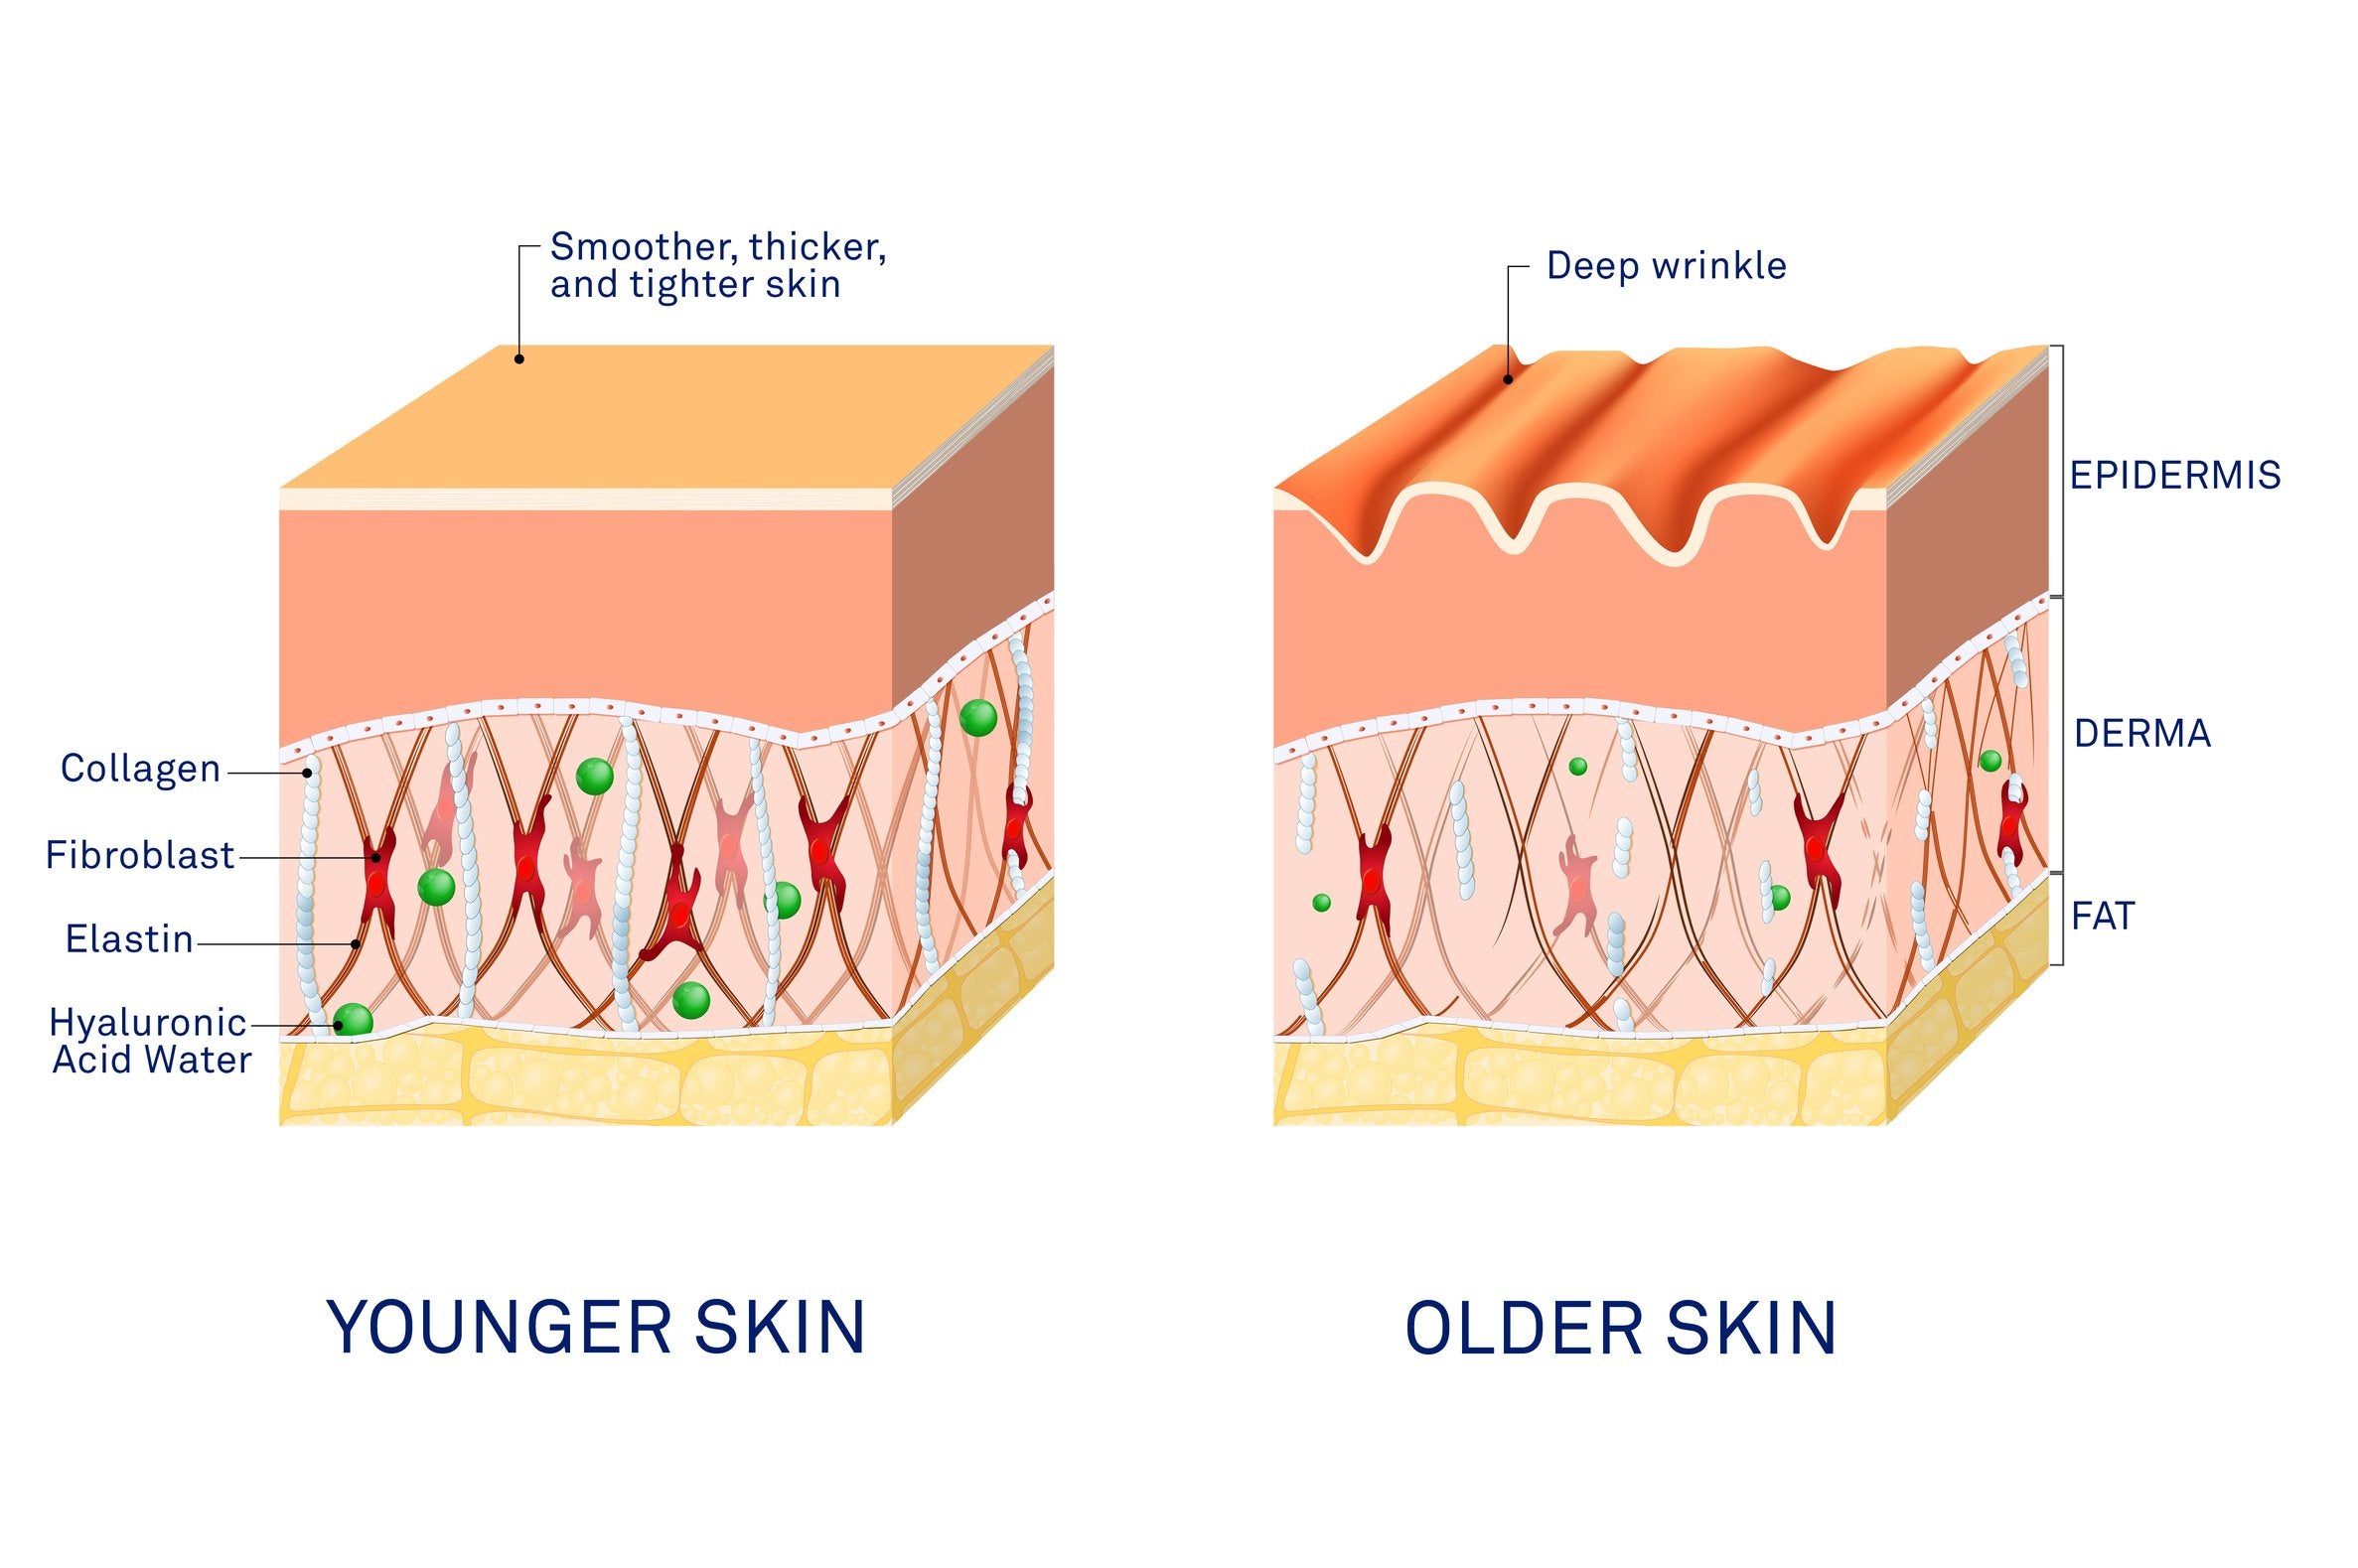 a detailed label diagram comparing young and aging skin, with properties and differences illustrated through diagrams